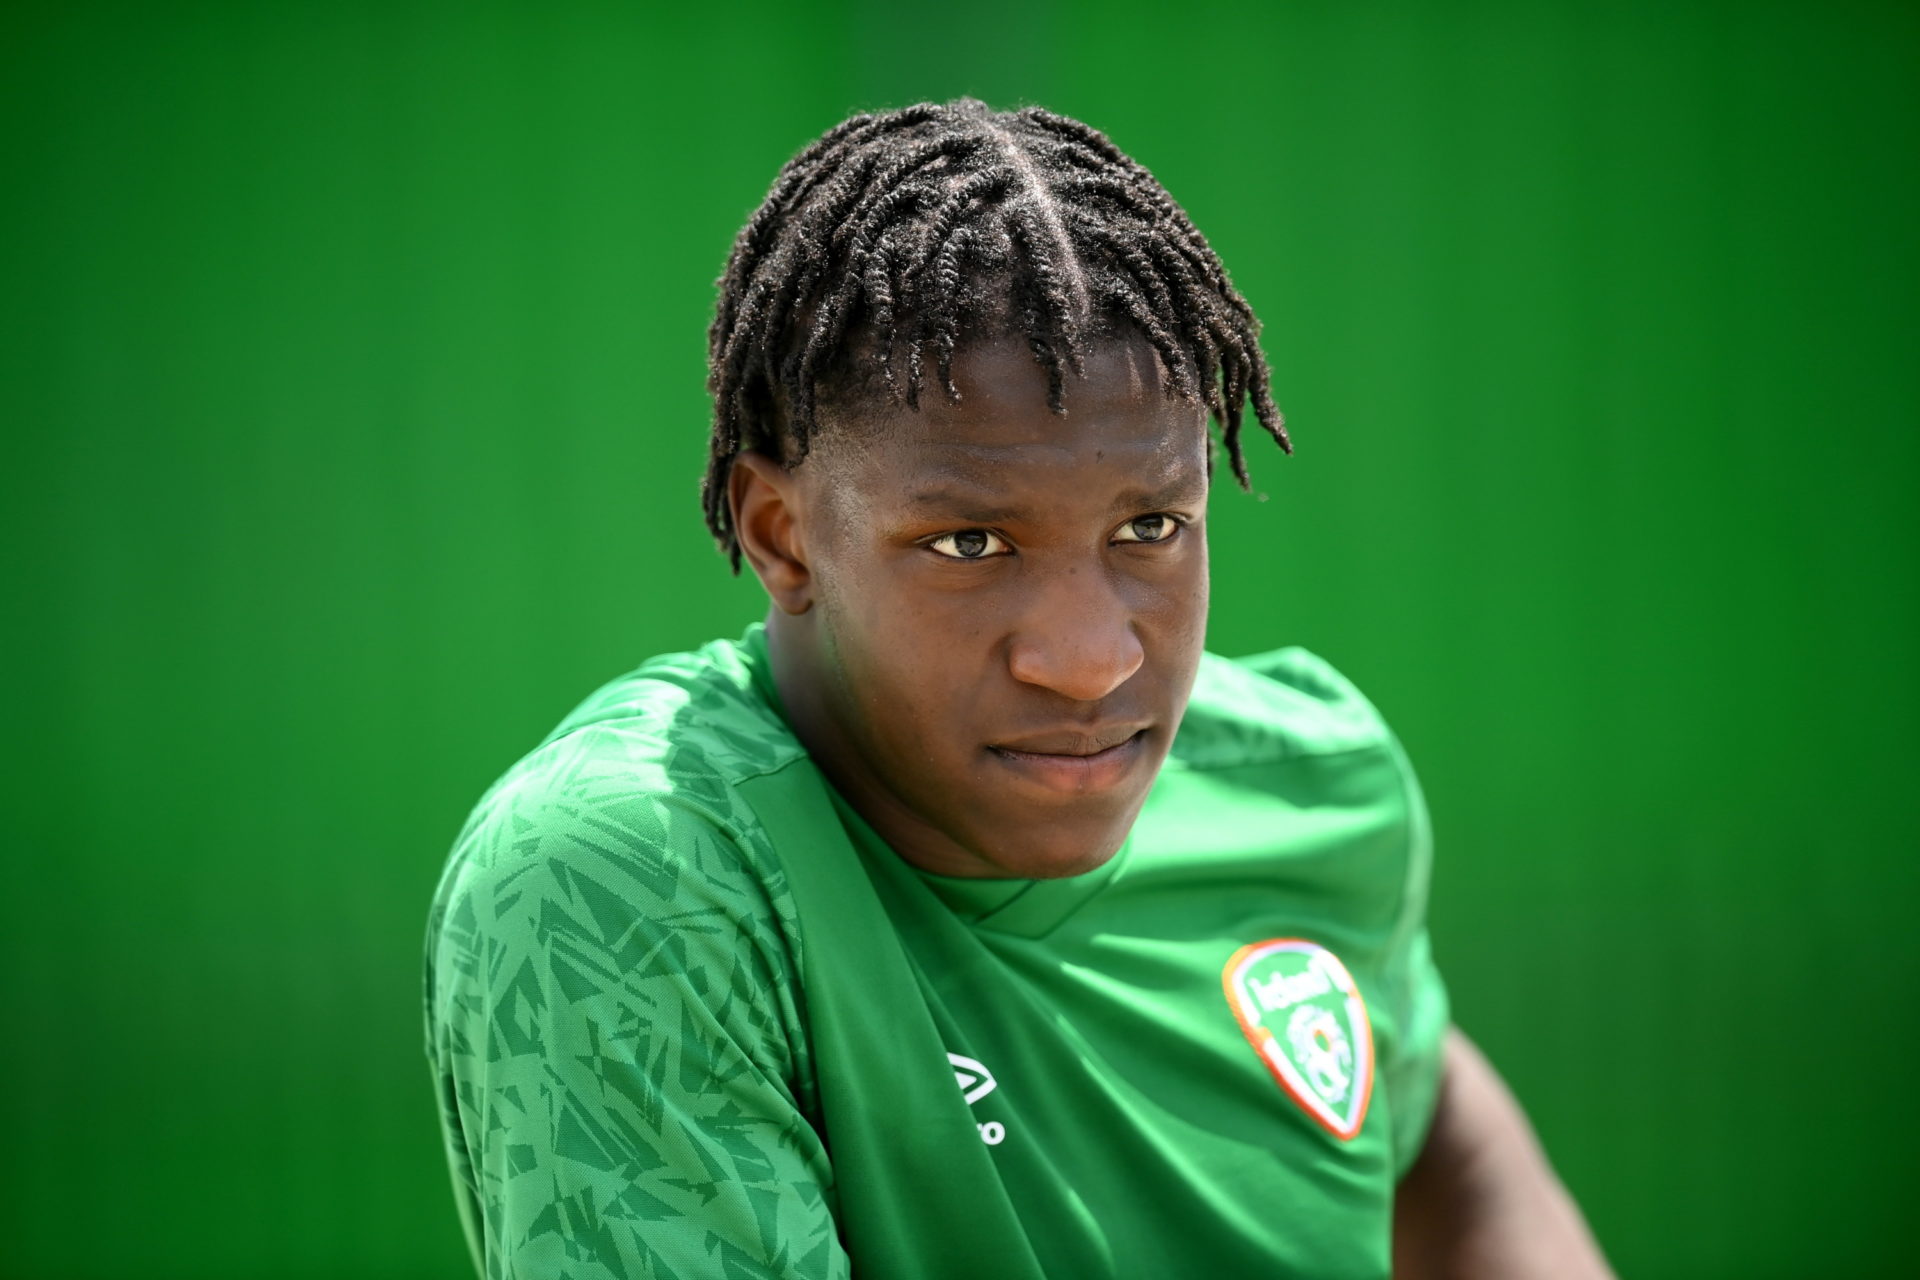 Bosun Lawal has been part of the Ireland under-21 setup before